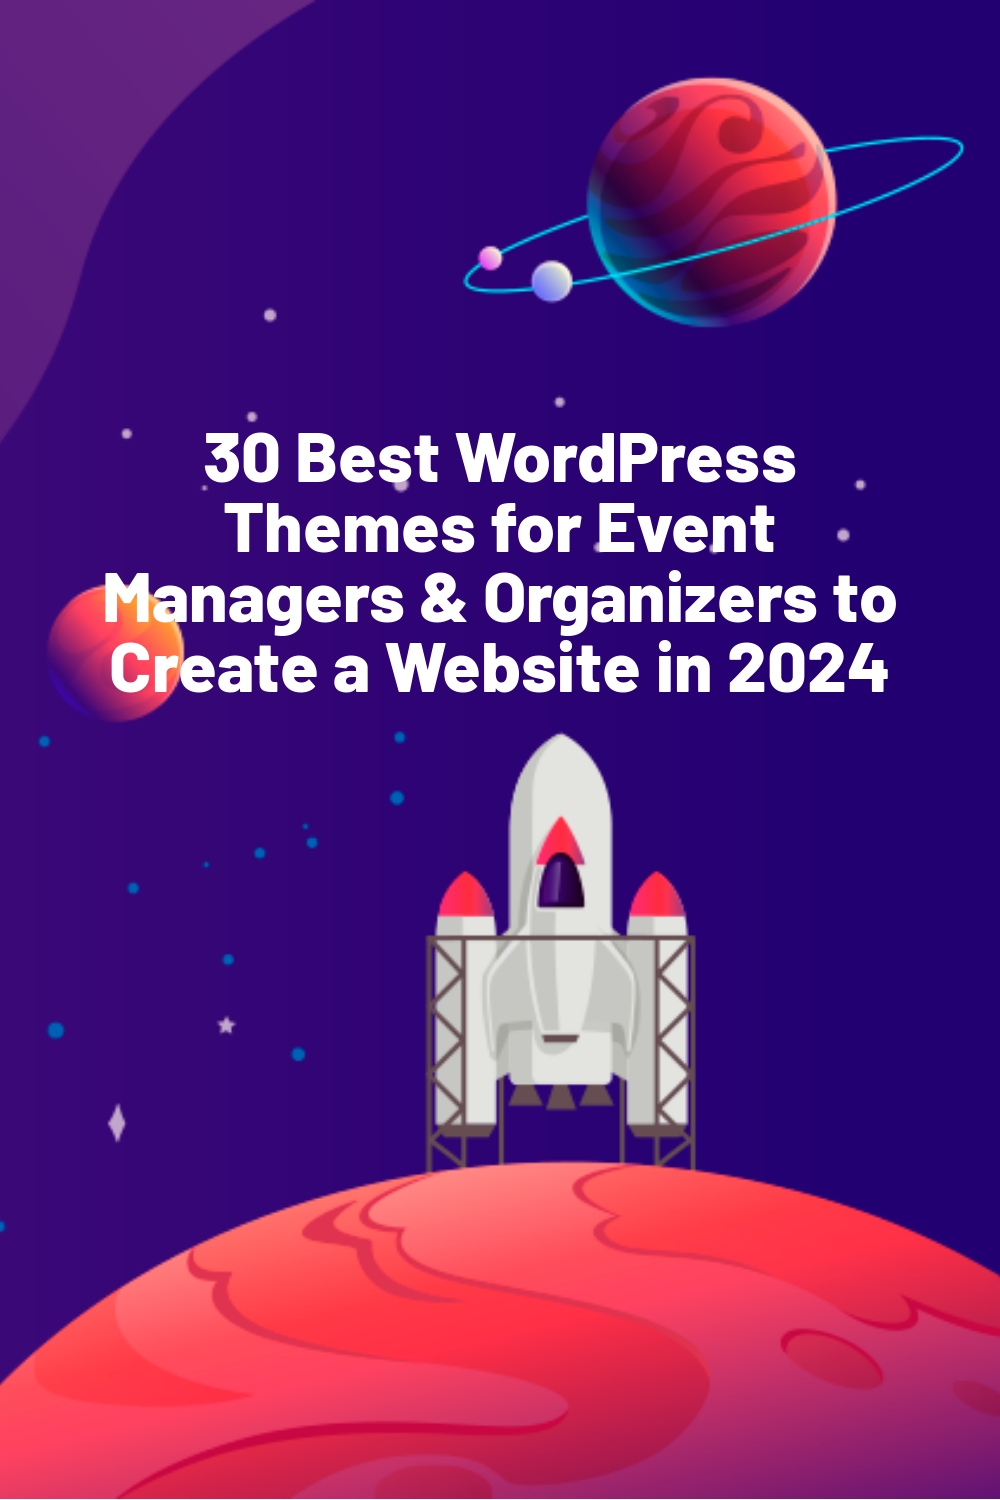 30 Best WordPress Themes for Event Managers & Organizers to Create a Website in 2024